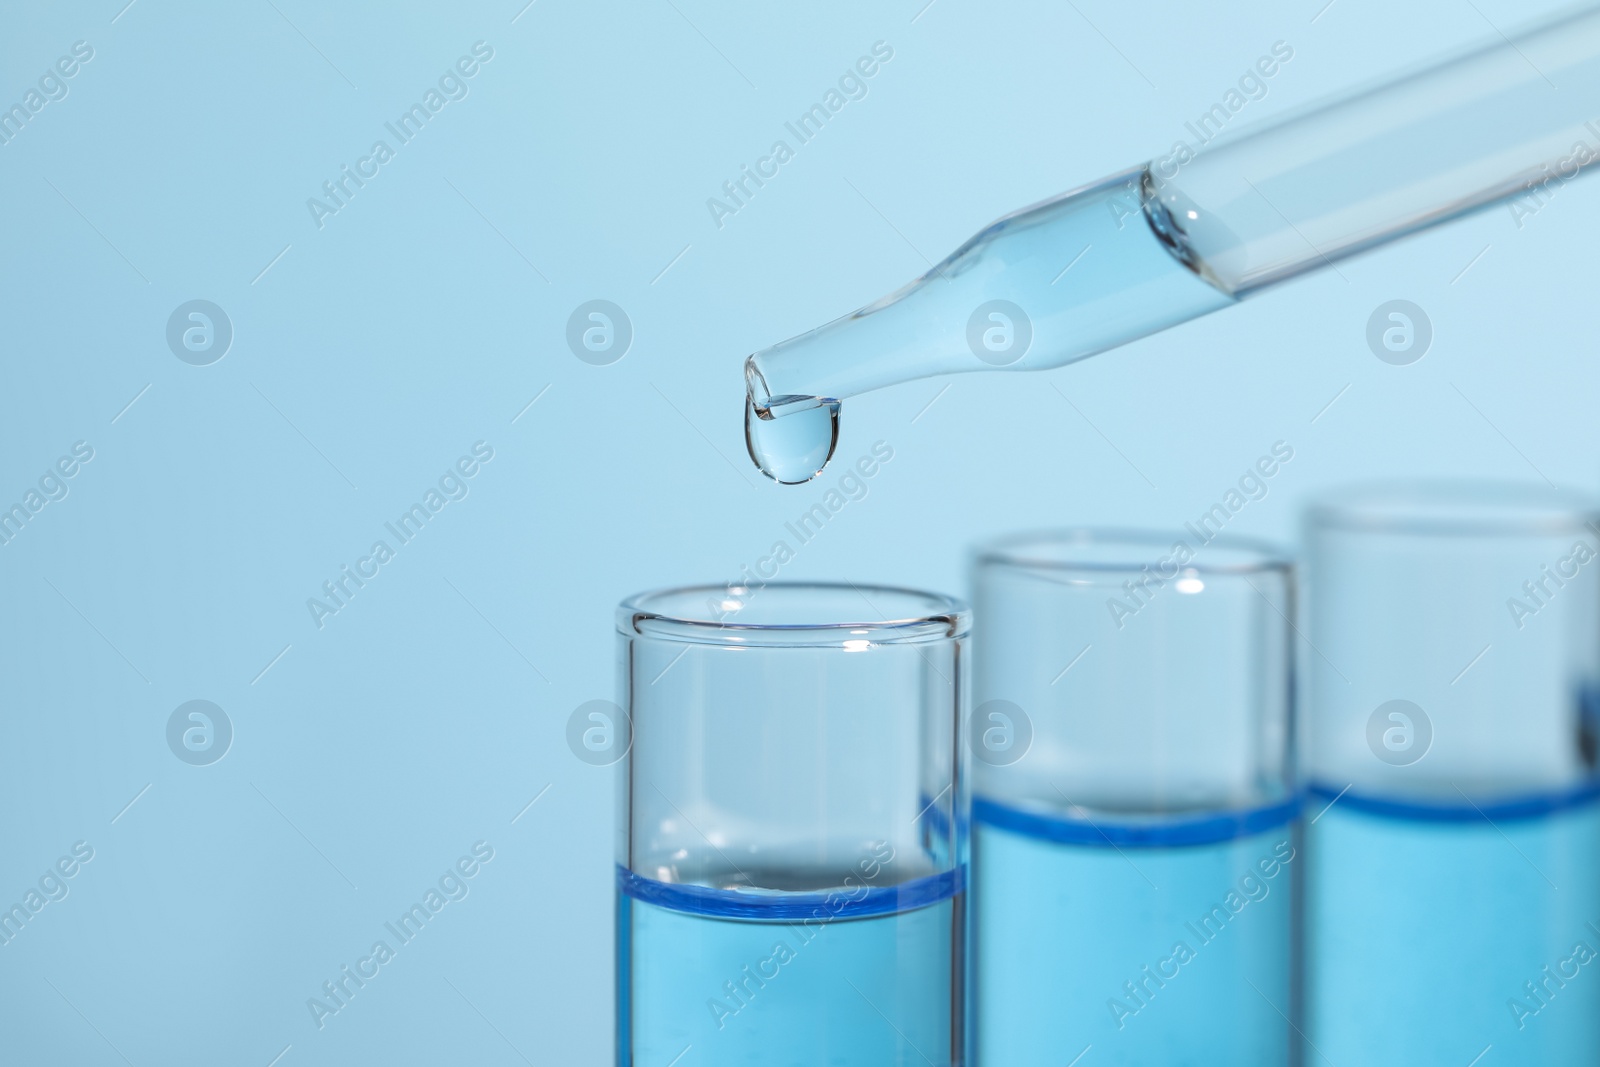 Photo of Dripping reagent into test tube on light blue background, closeup. Laboratory analysis